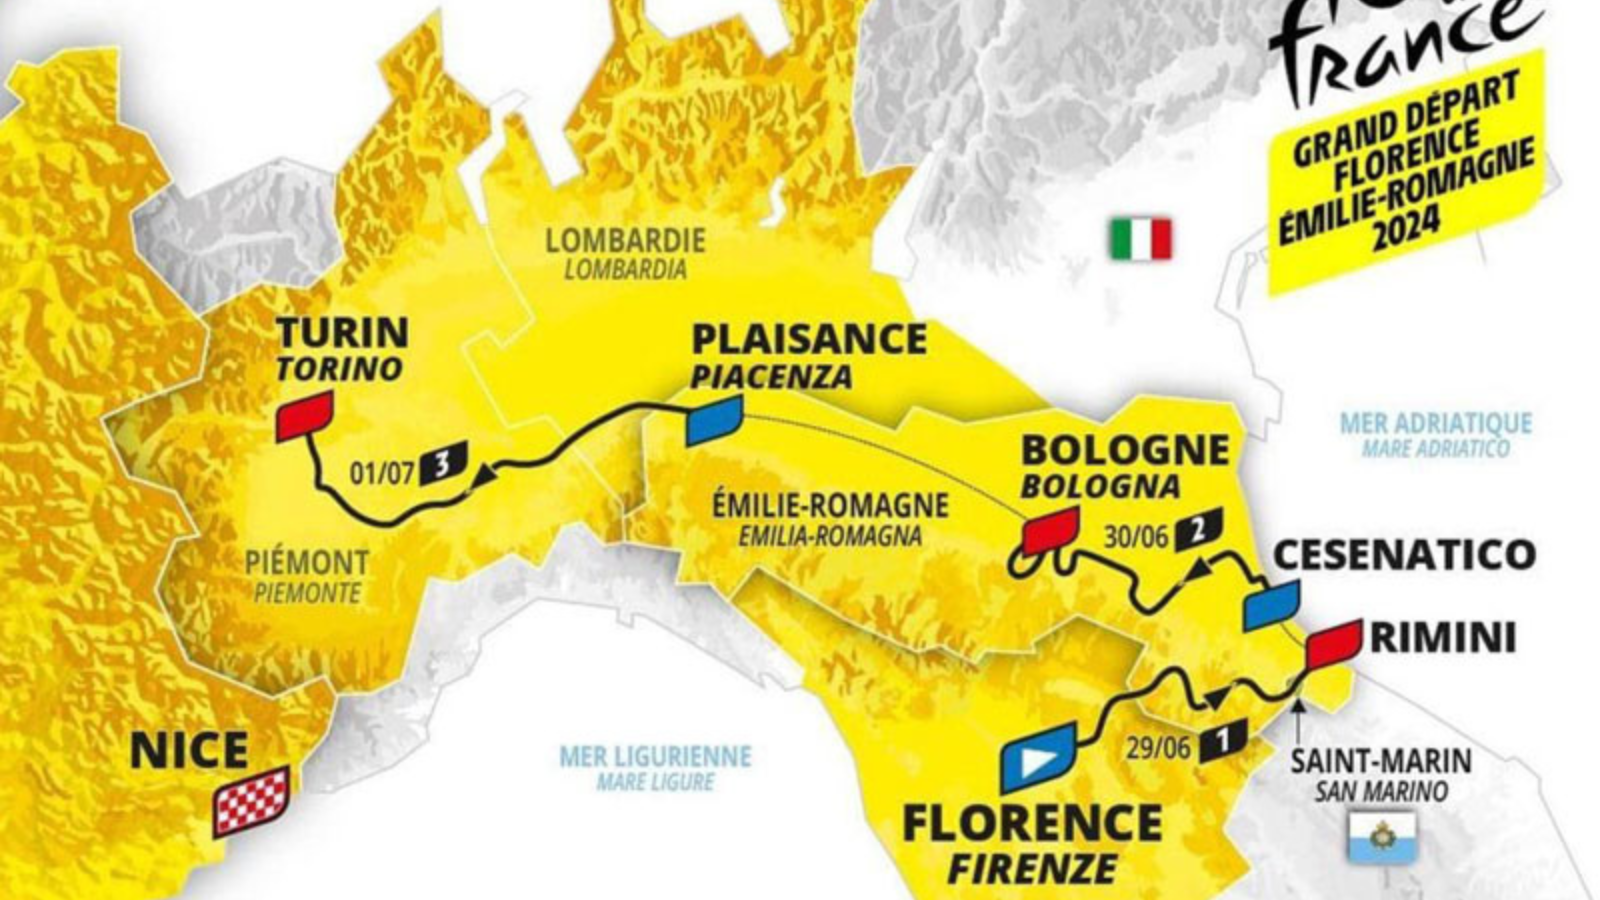 From Florence to Nice, all stages of Tour de France 2024